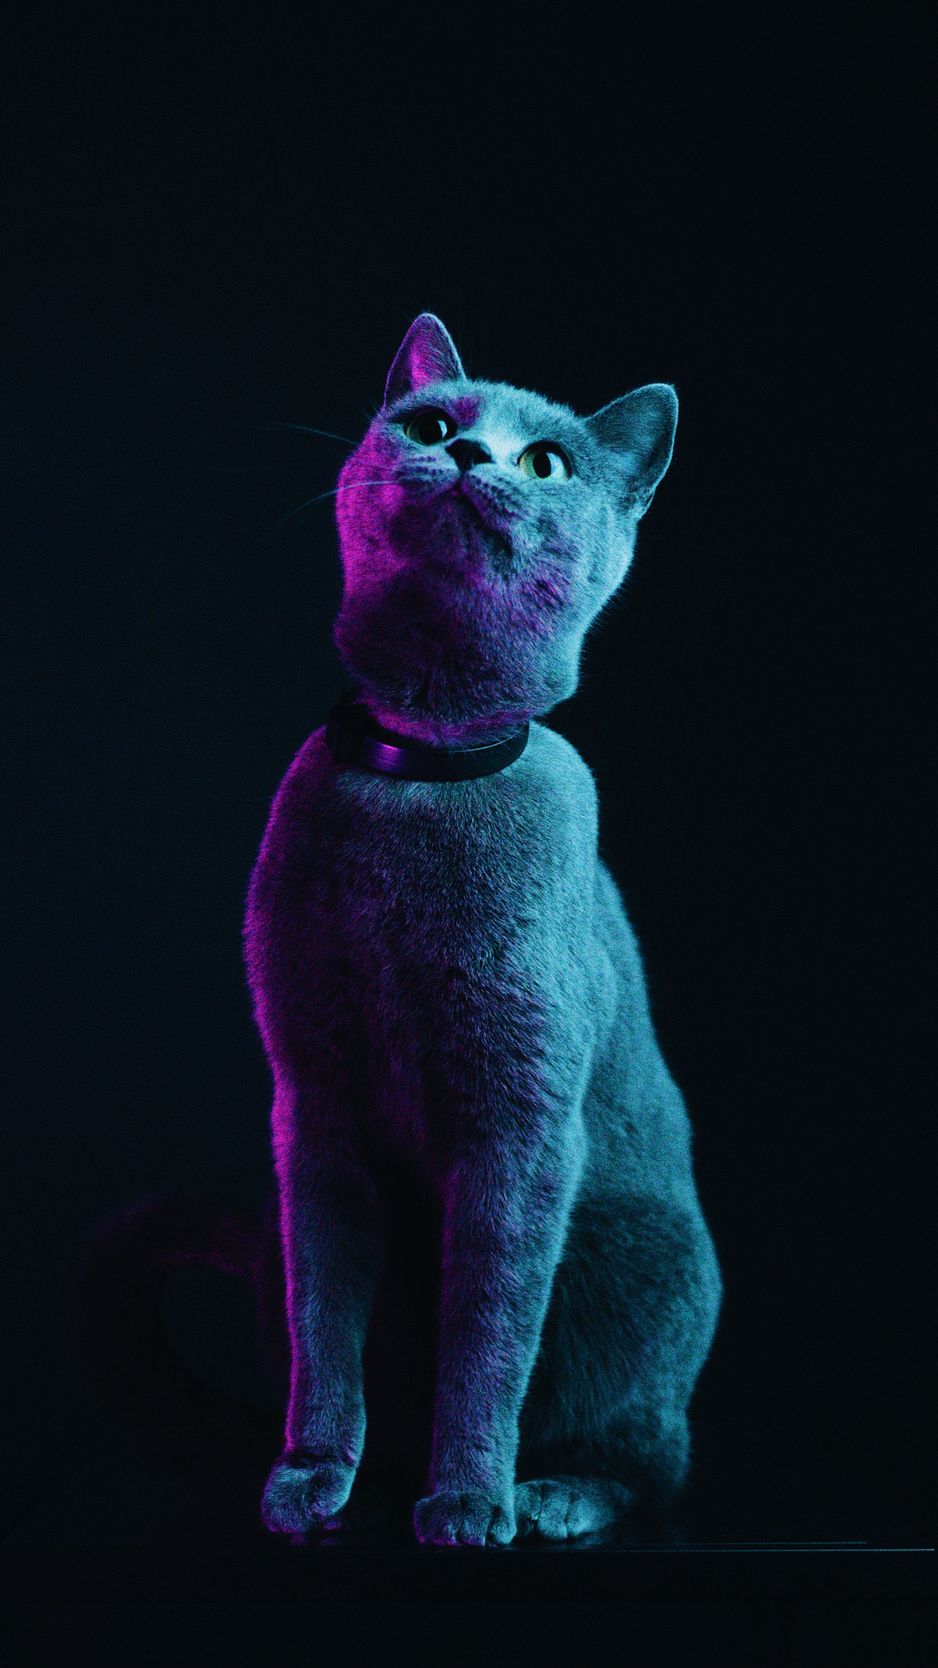 Funny neon cat wallpaper by FortzaYolo  Download on ZEDGE  a17c